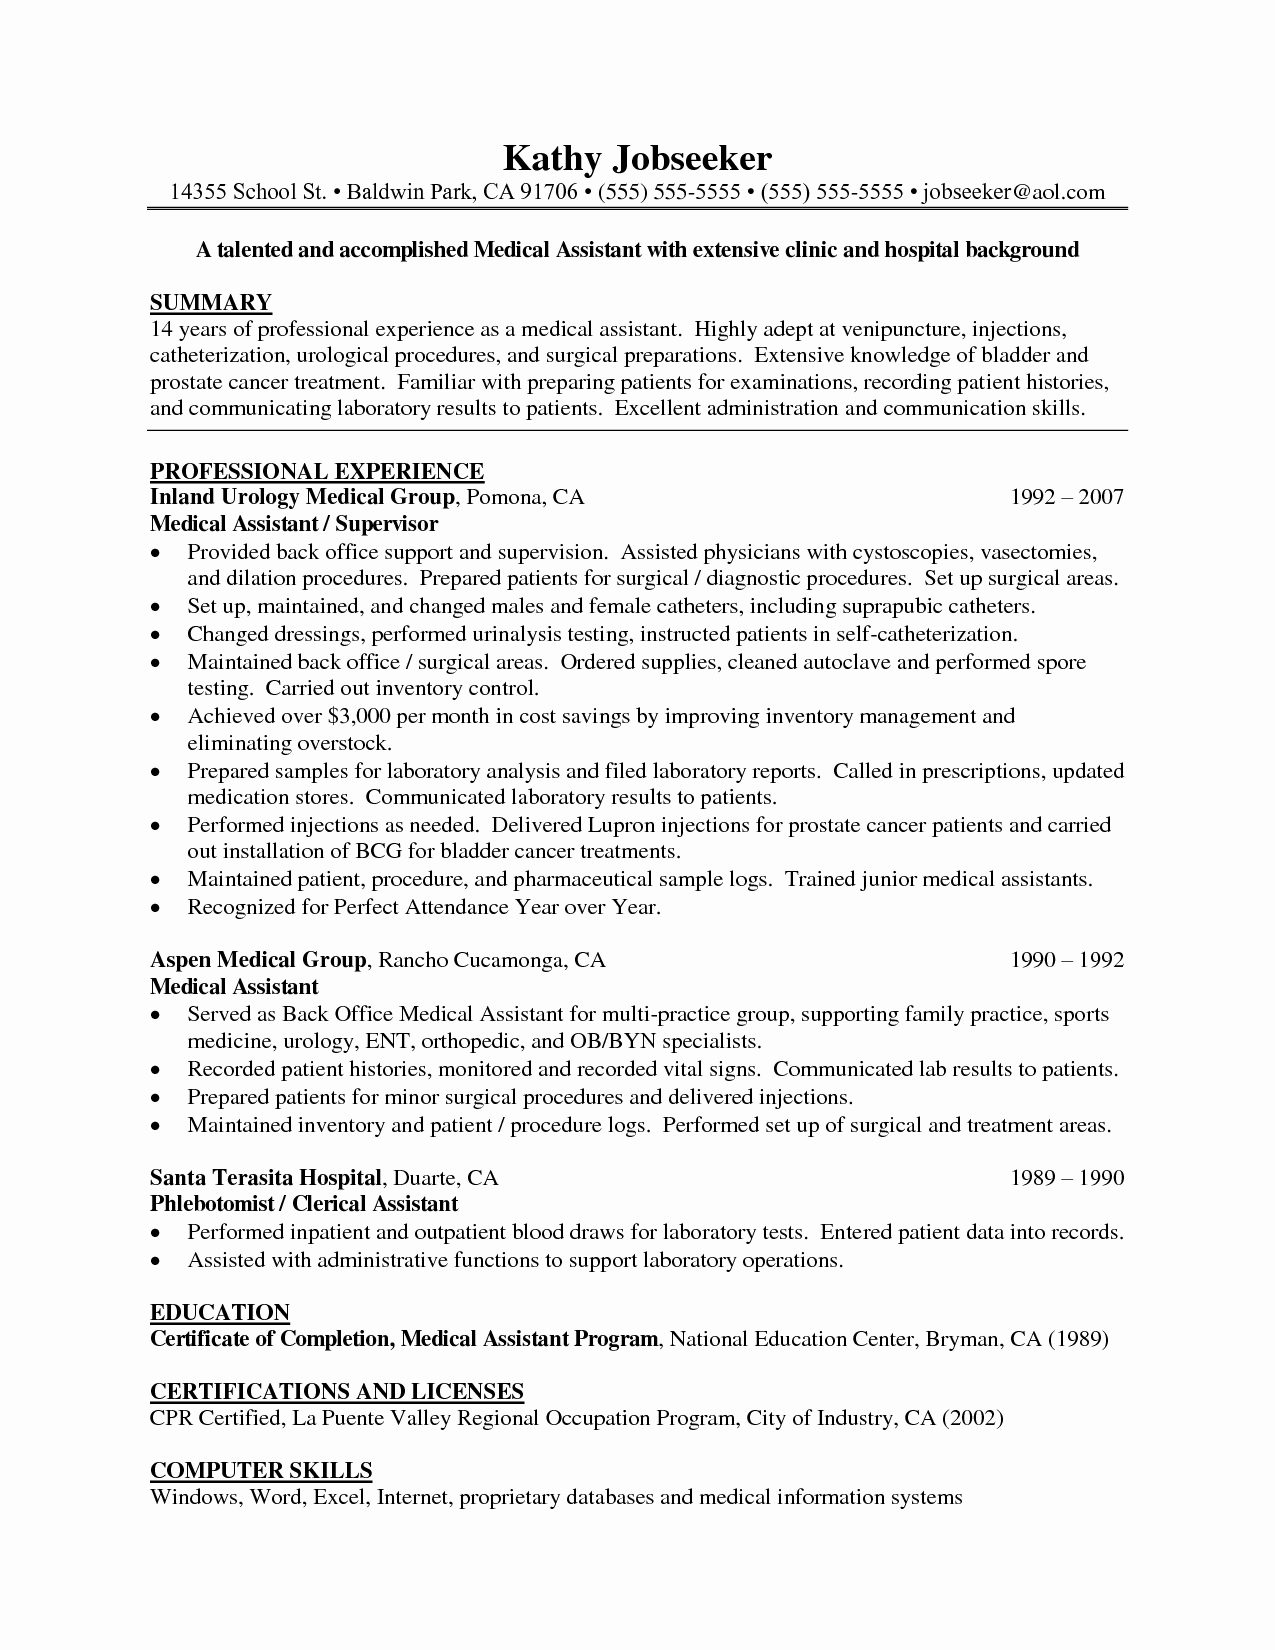 Resume Template Medical assistant Best Of Resume for Certified Medical assistant